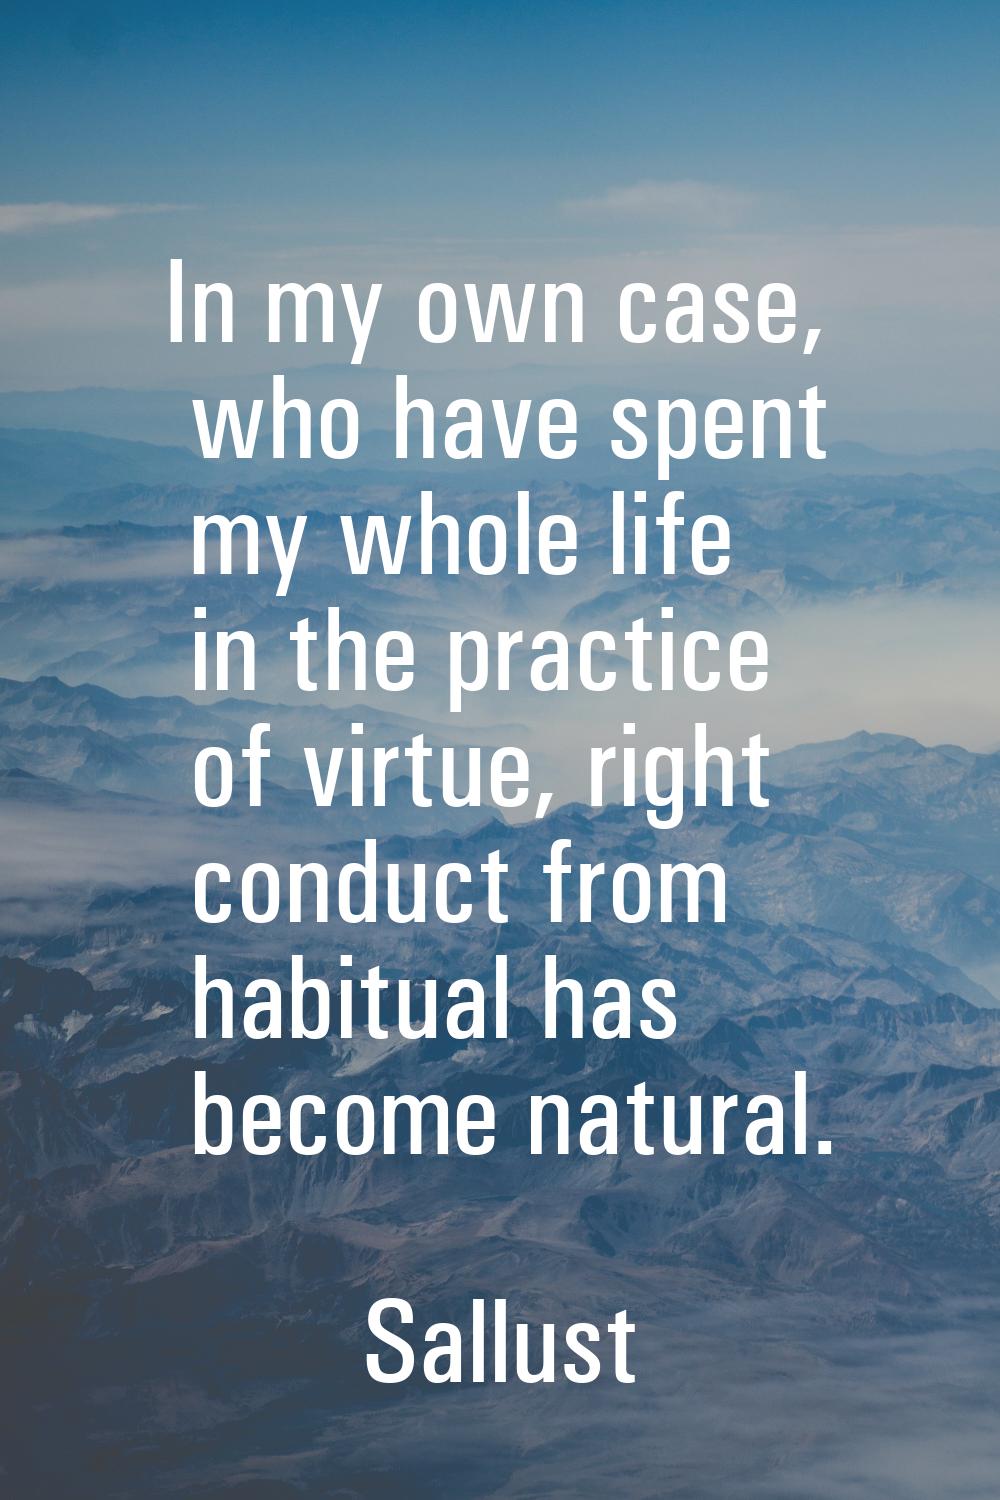 In my own case, who have spent my whole life in the practice of virtue, right conduct from habitual